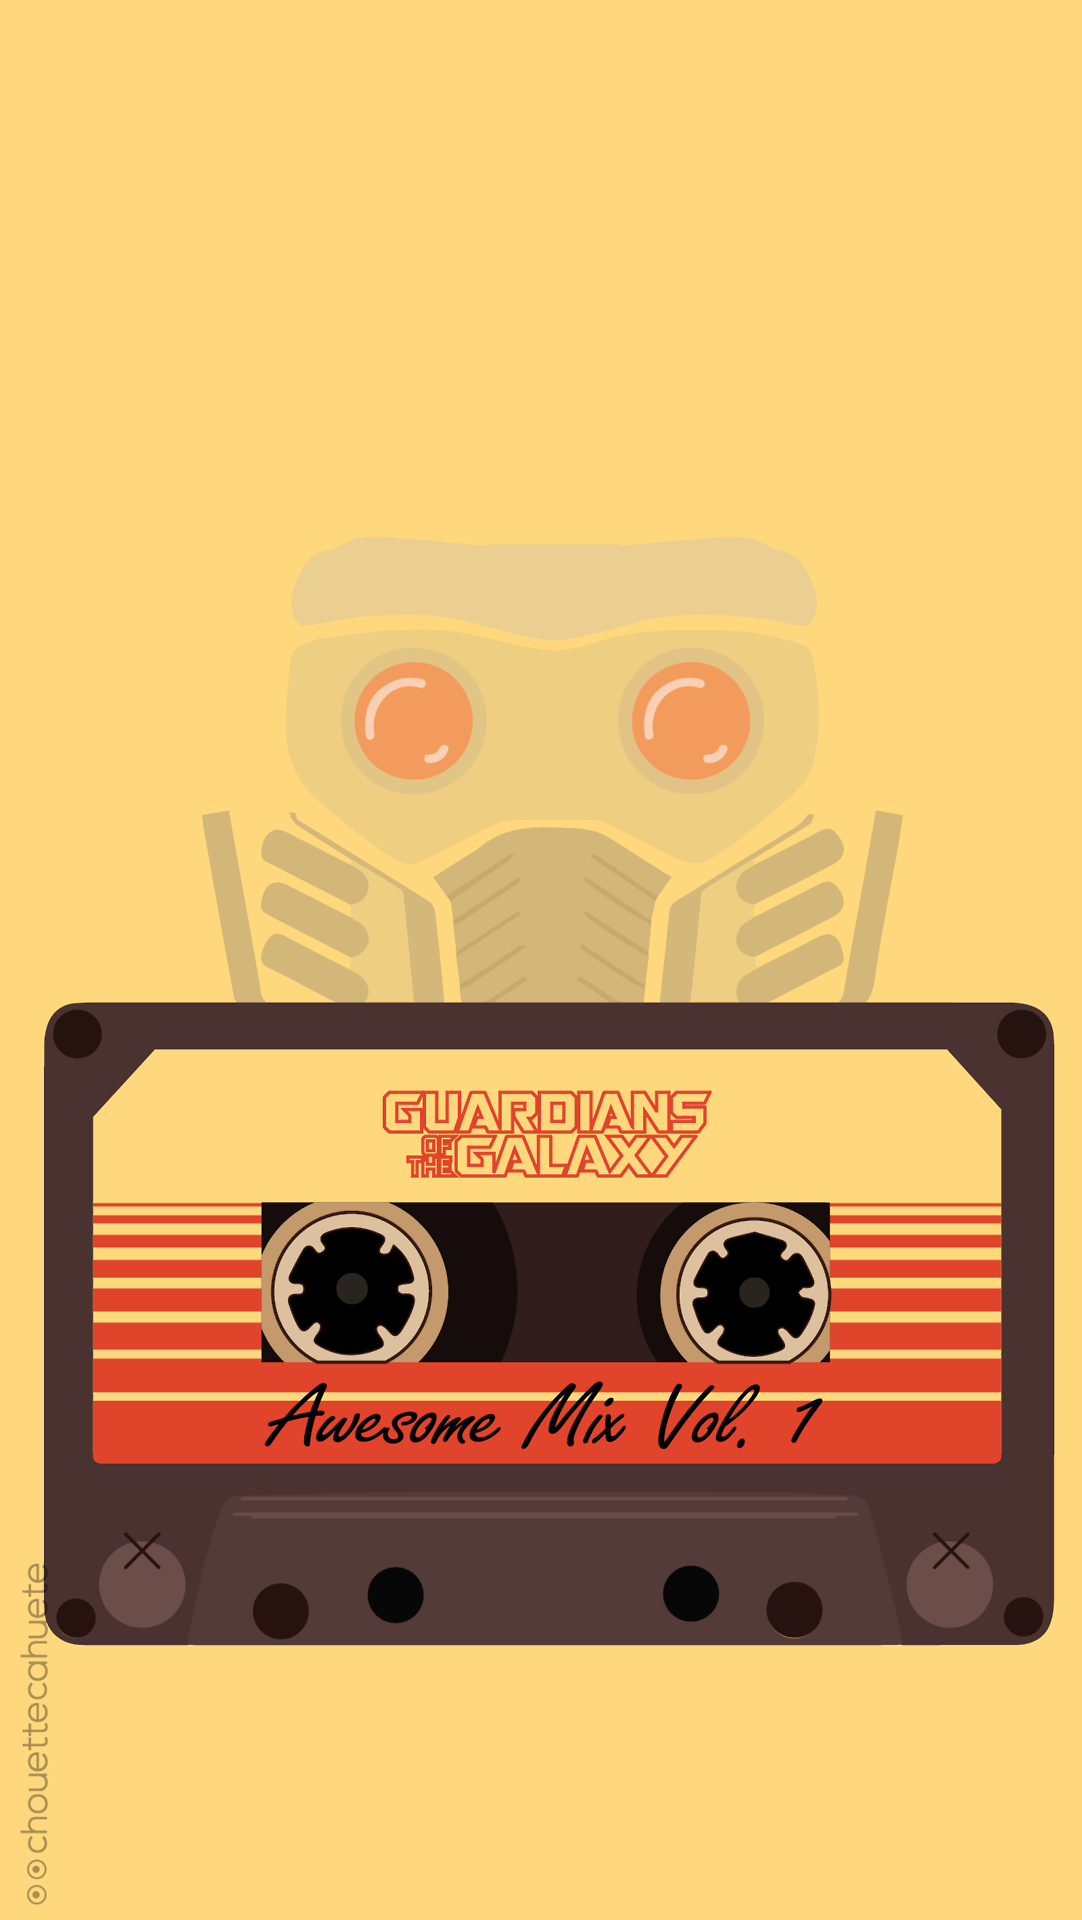 awesome mix tape vol 1 | Tumblr